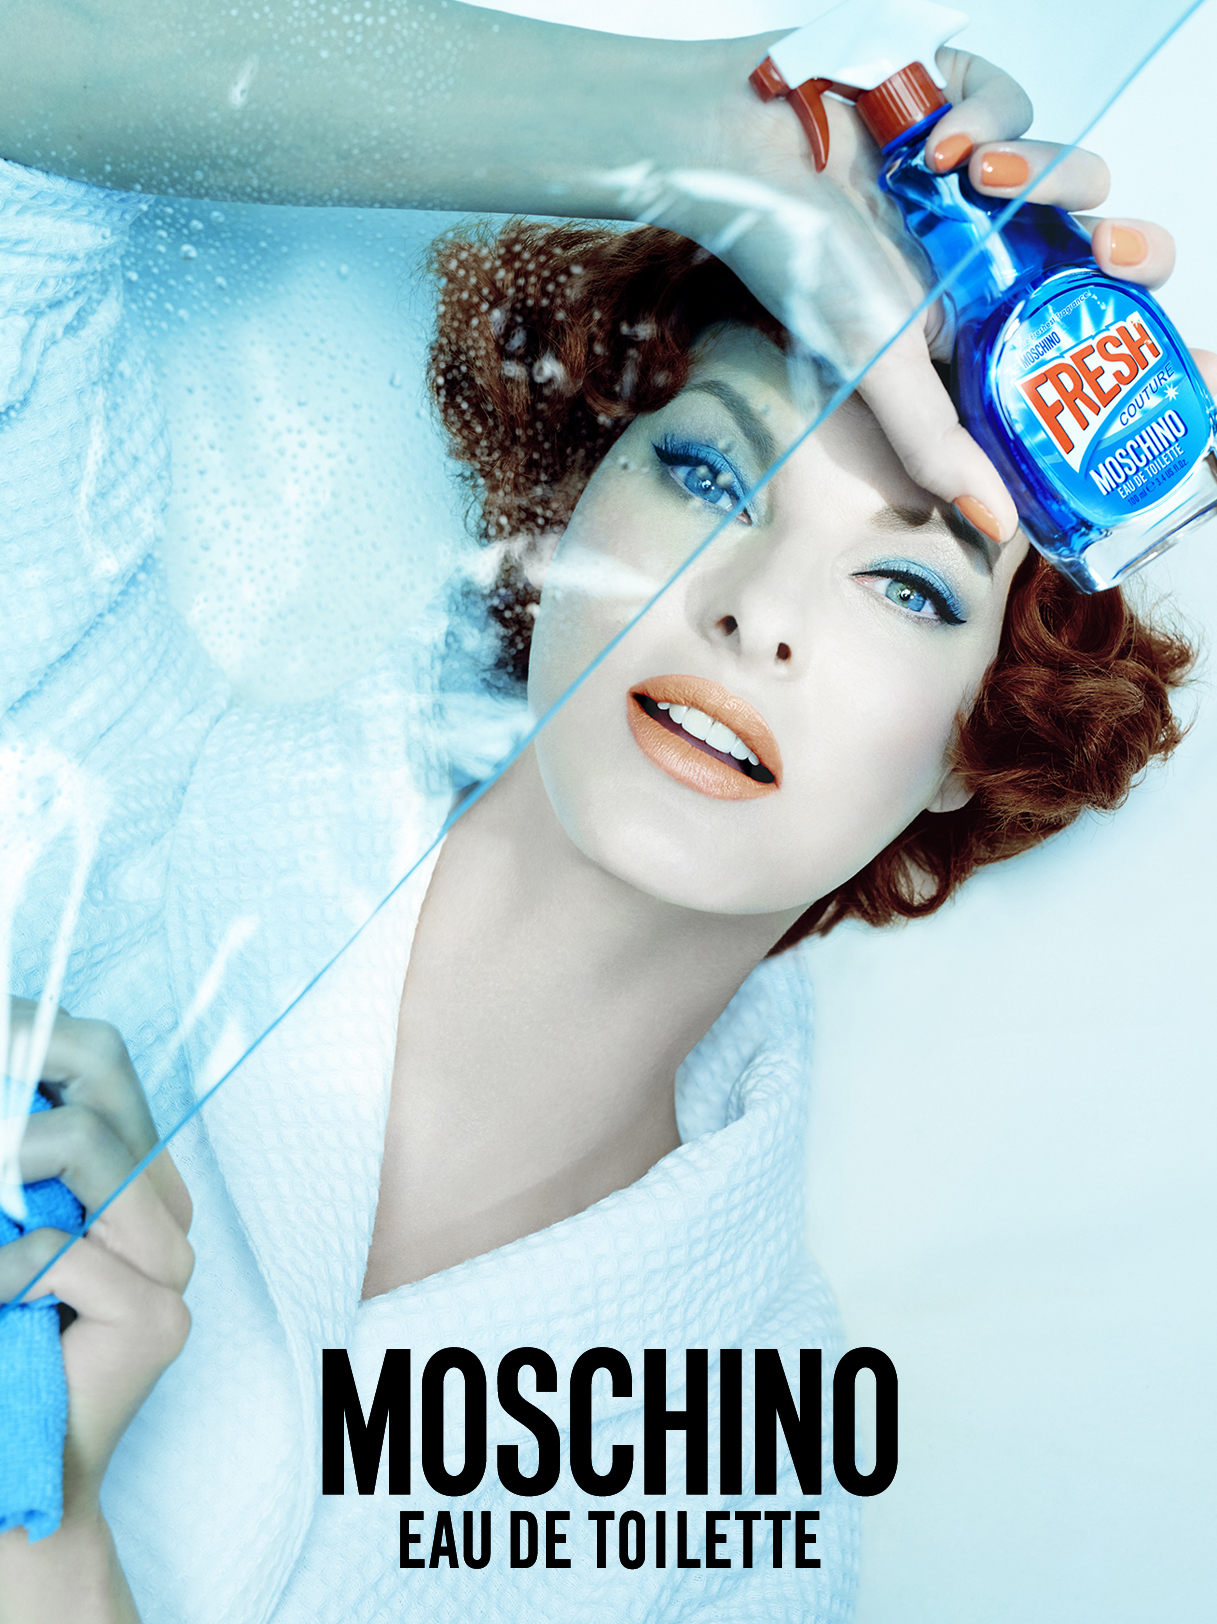 Jeremy Scott for Moschino launches Fresh Couture